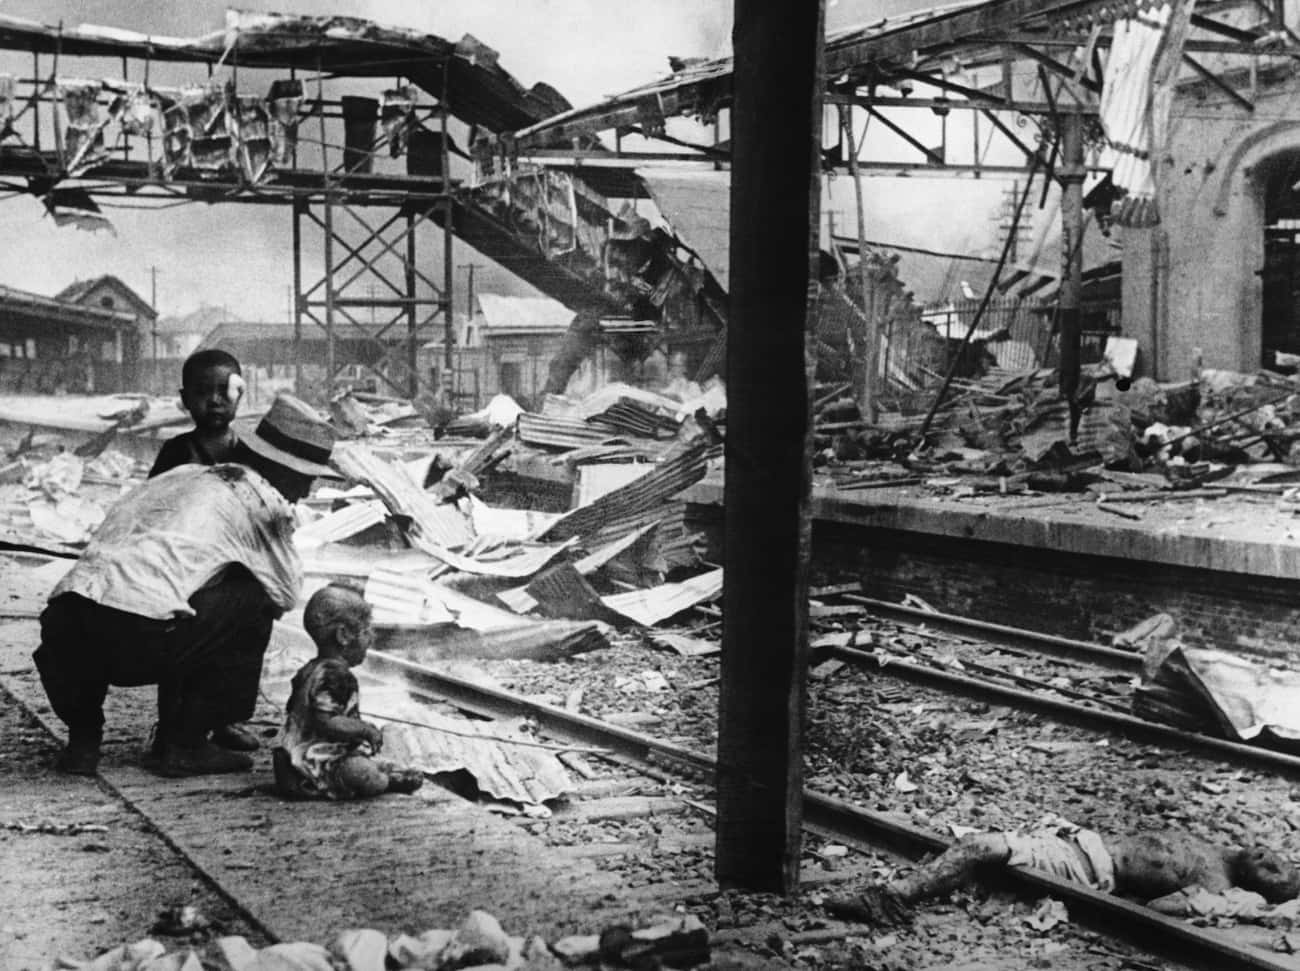 The Shanghai South Station Bombing Left Nearly All Dead, 1937